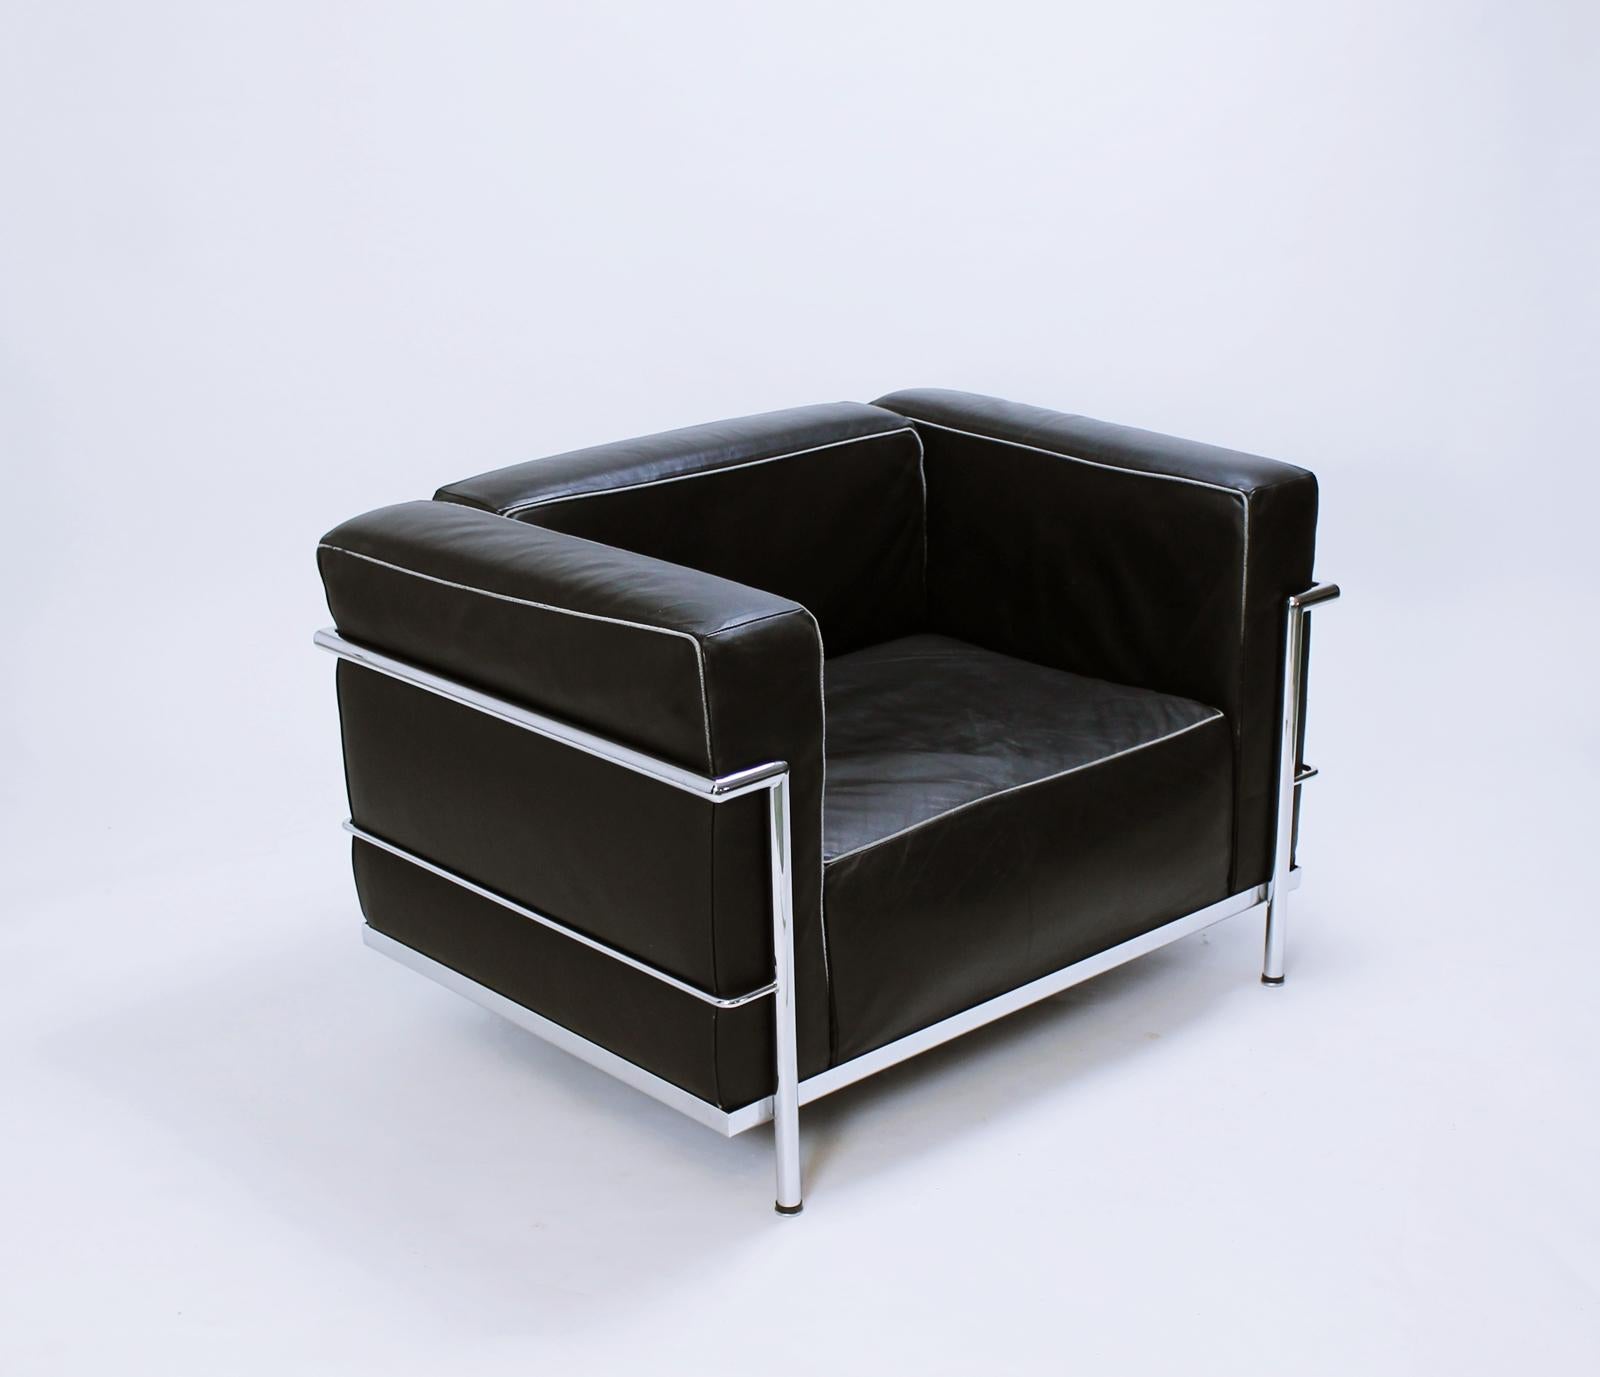 This armchair was designed by Le Corbusier, Pierre Jeanneret, Charlotte Perriand in 1928 and made in Italy by Alivar.

The LC3 features four unconnected cushions in black leather, enclosed in chrome steel tube cage that constitutes the primary